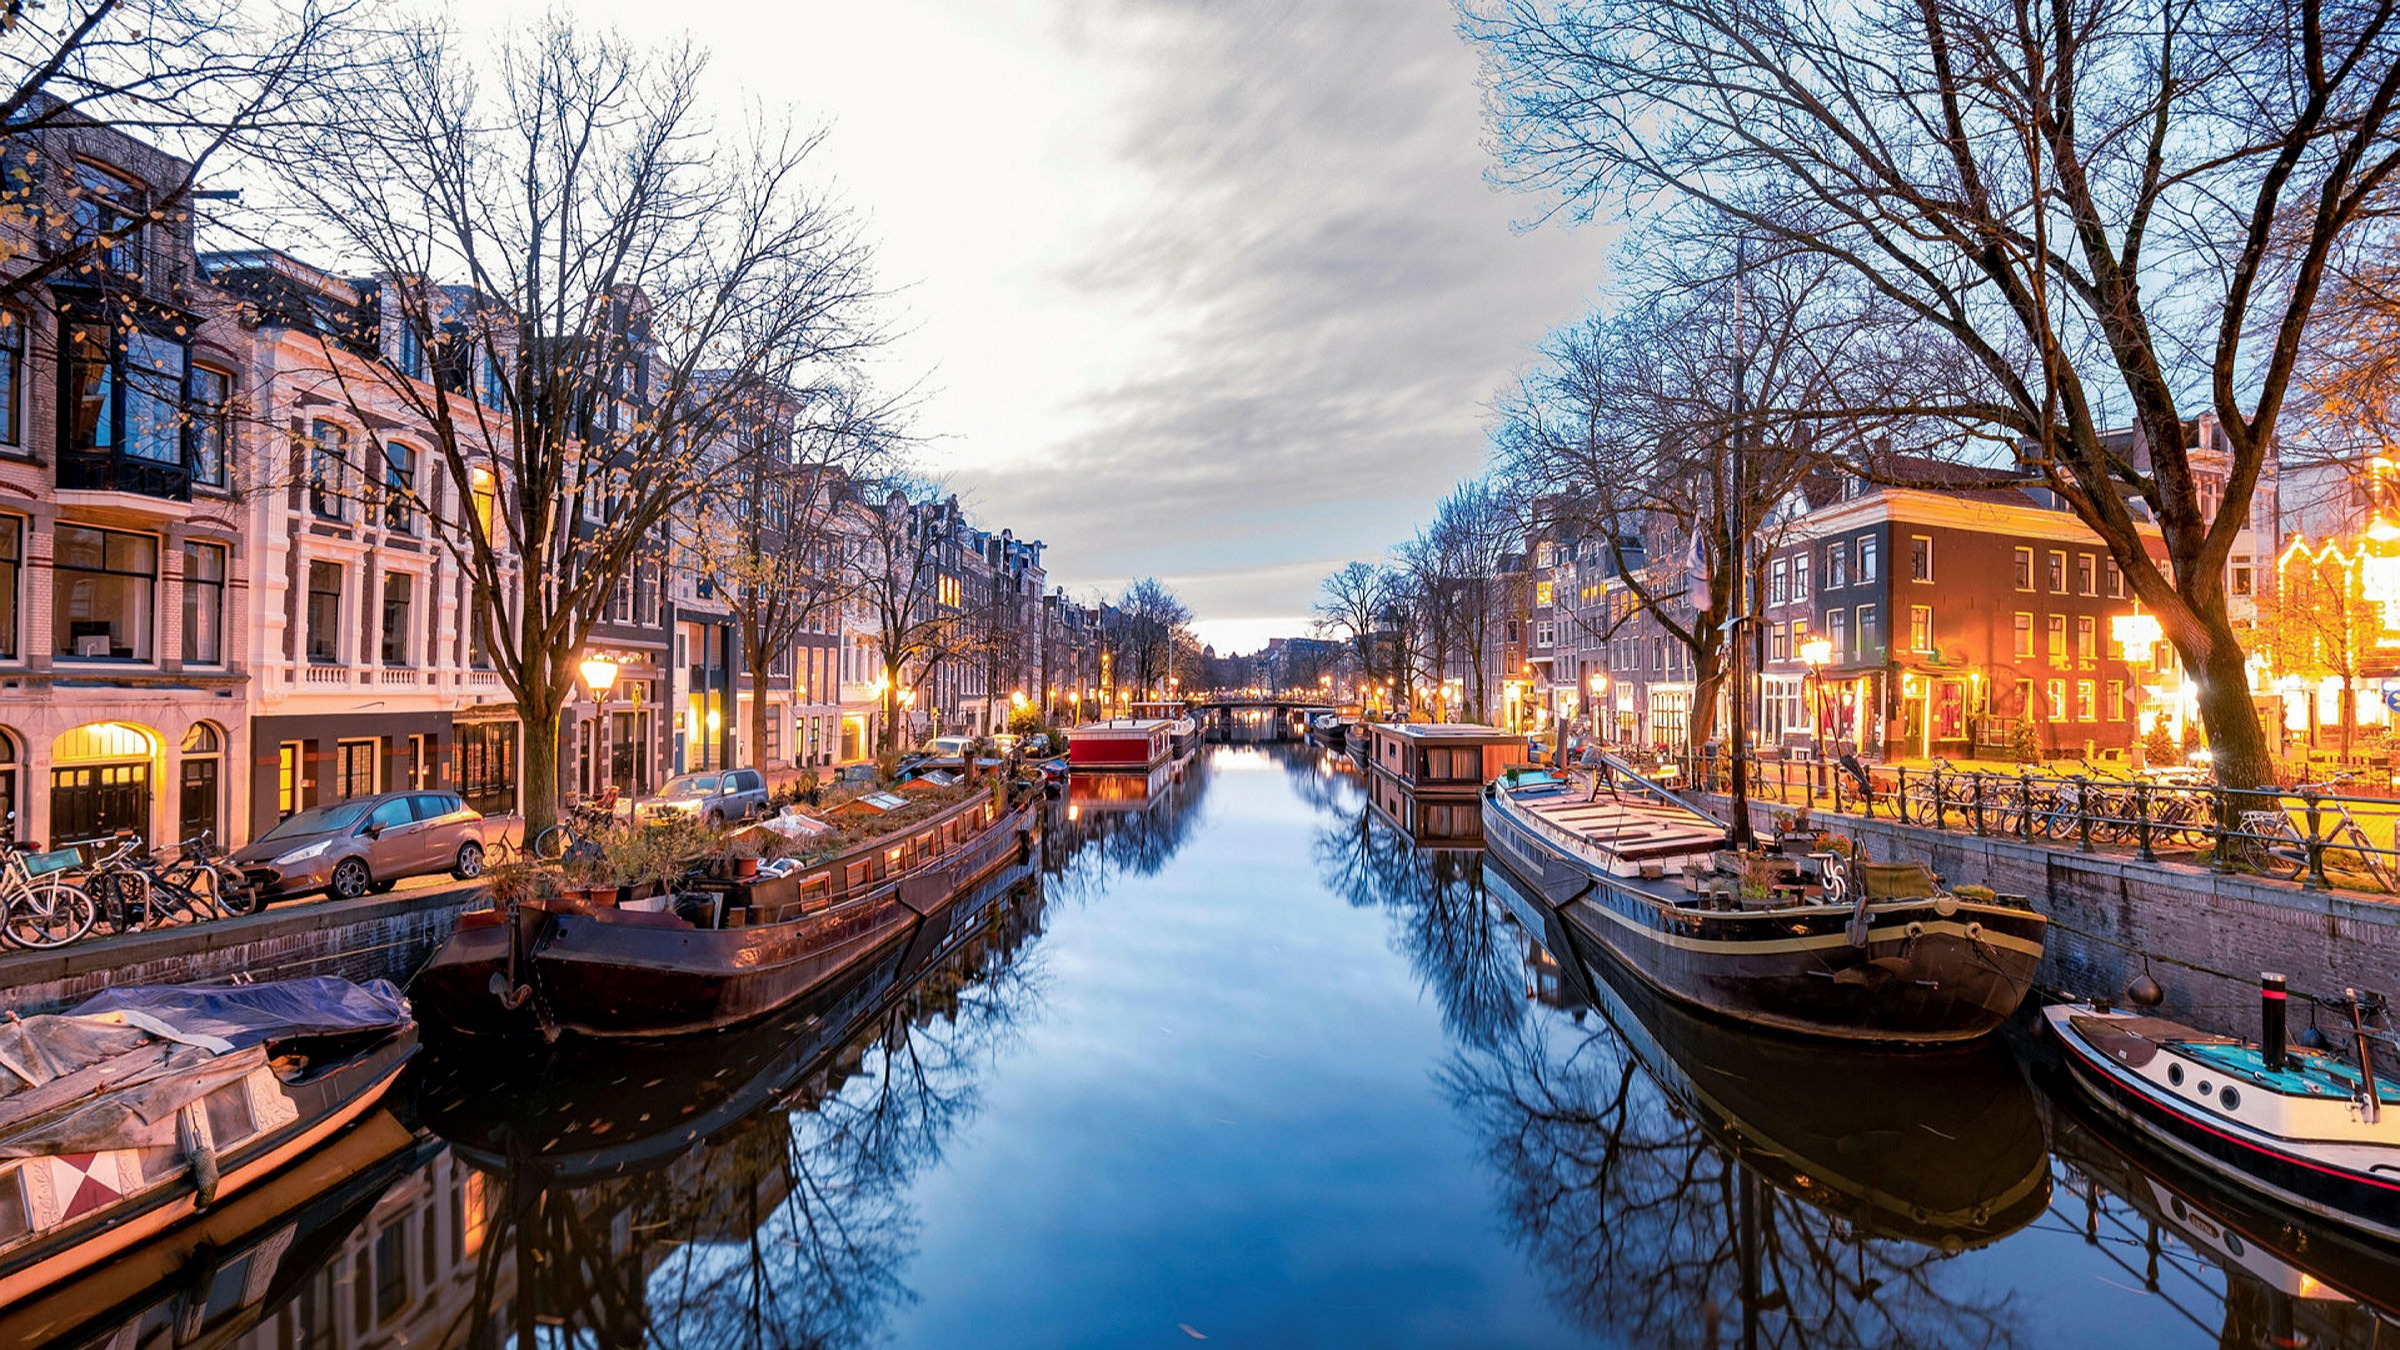 Echt distillatie Dictatuur Canals, cobbles and wonky houses': the allure of Amsterdam | Financial Times